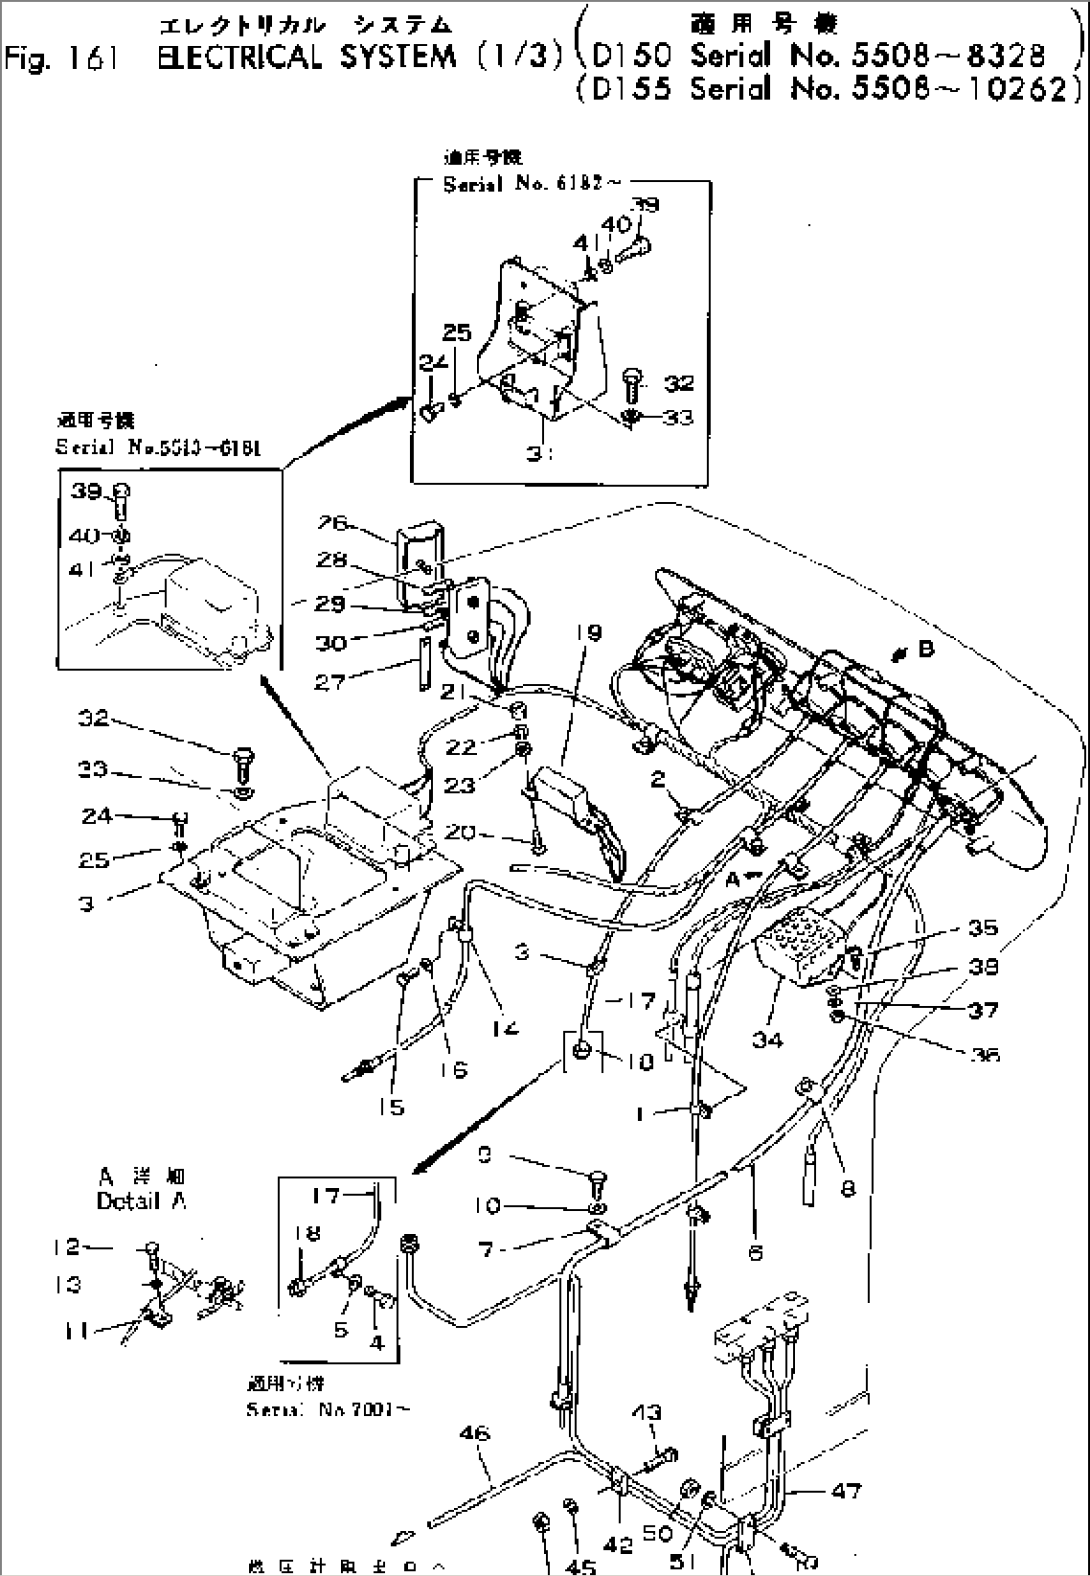 ELECTRICAL SYSTEM (1/3)(#5508-8328)